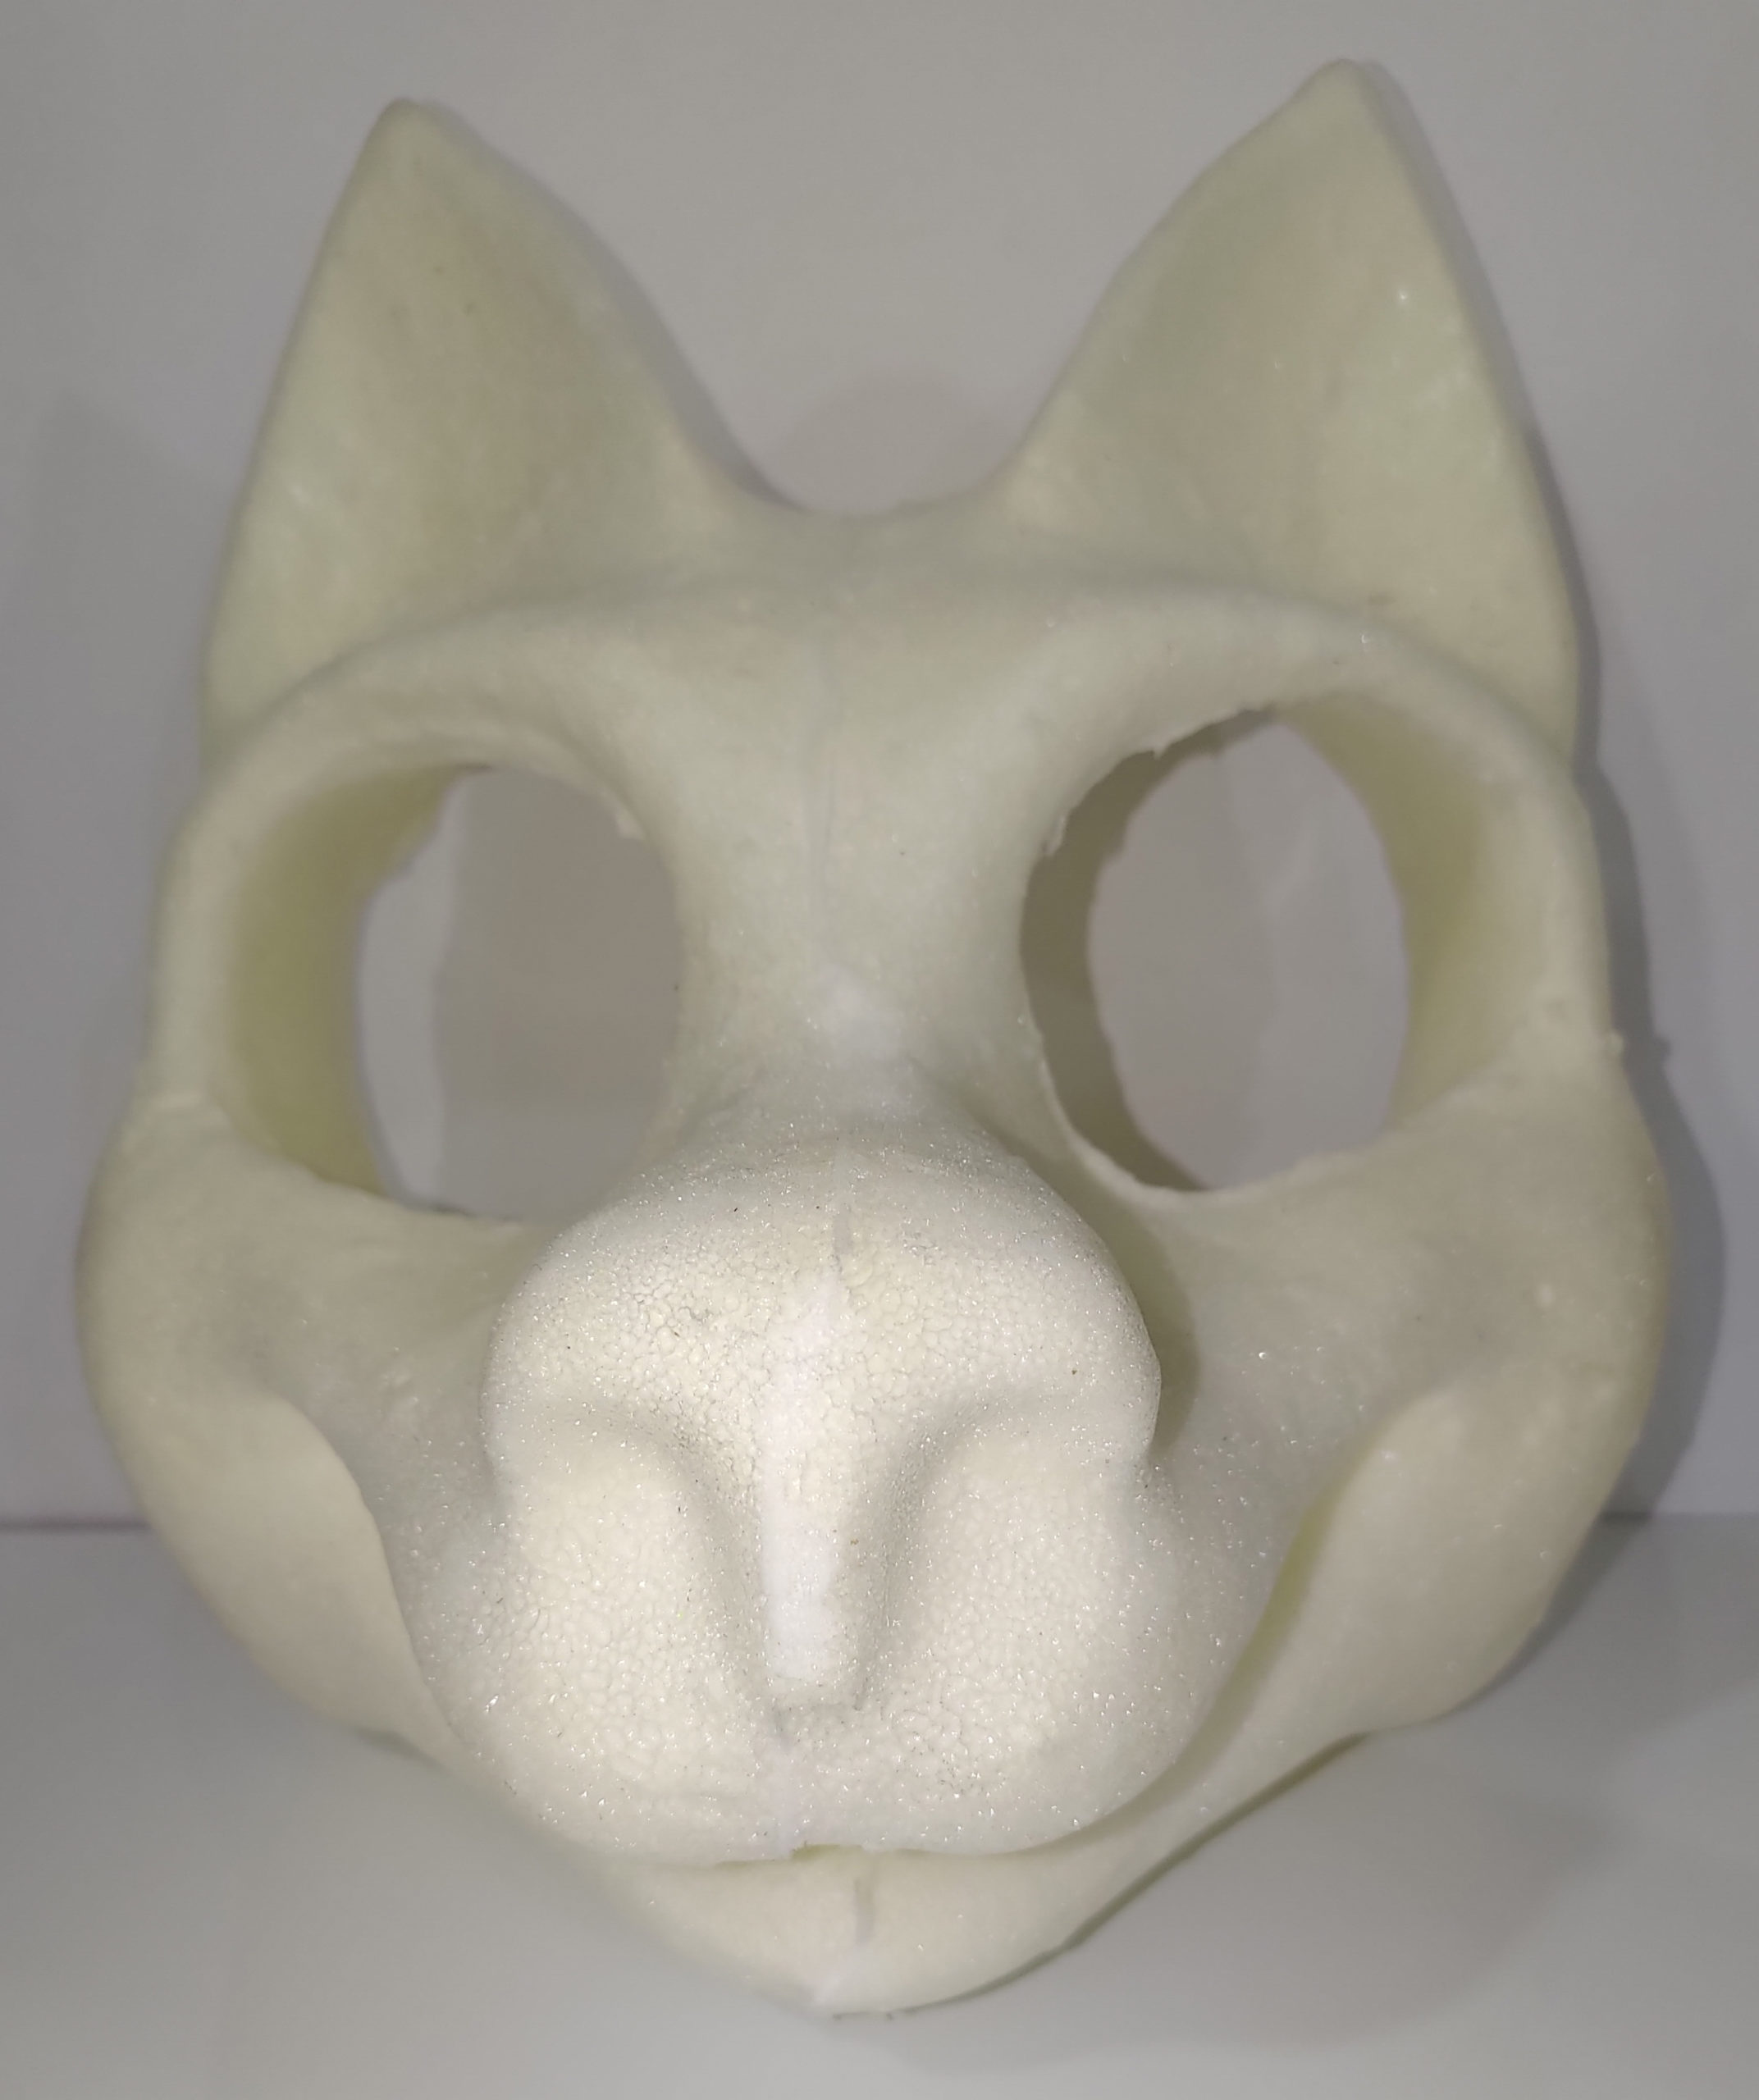 Ben the Bear, Furry Fursuit Foam Full Head Base for Fursuiting, For Furries  and Cosplay - DIY - fhb17